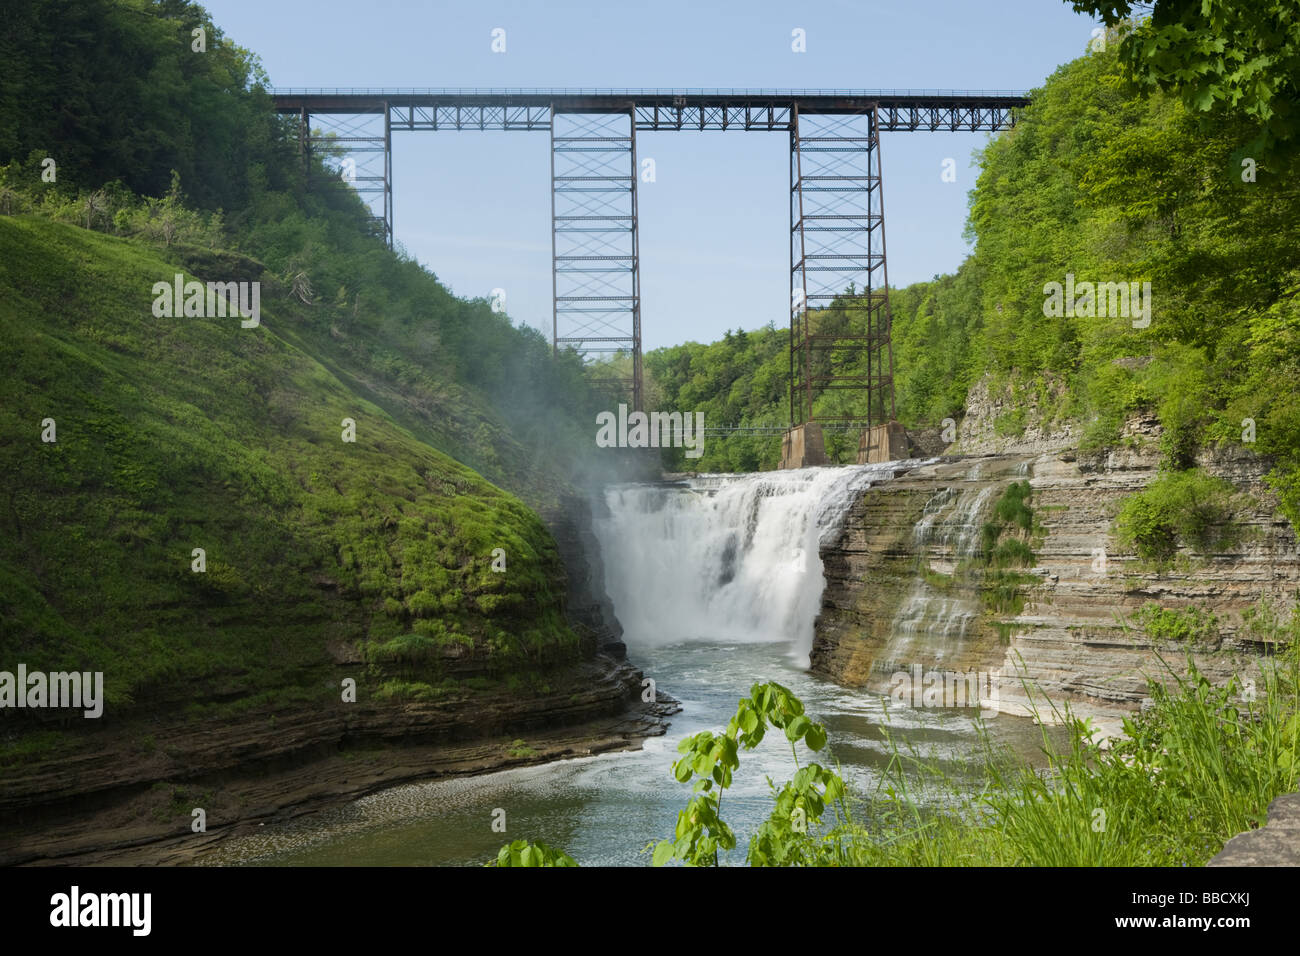 Upper Falls Letchworth State Park Genesee River Gorge western New York Wyoming Comté Banque D'Images